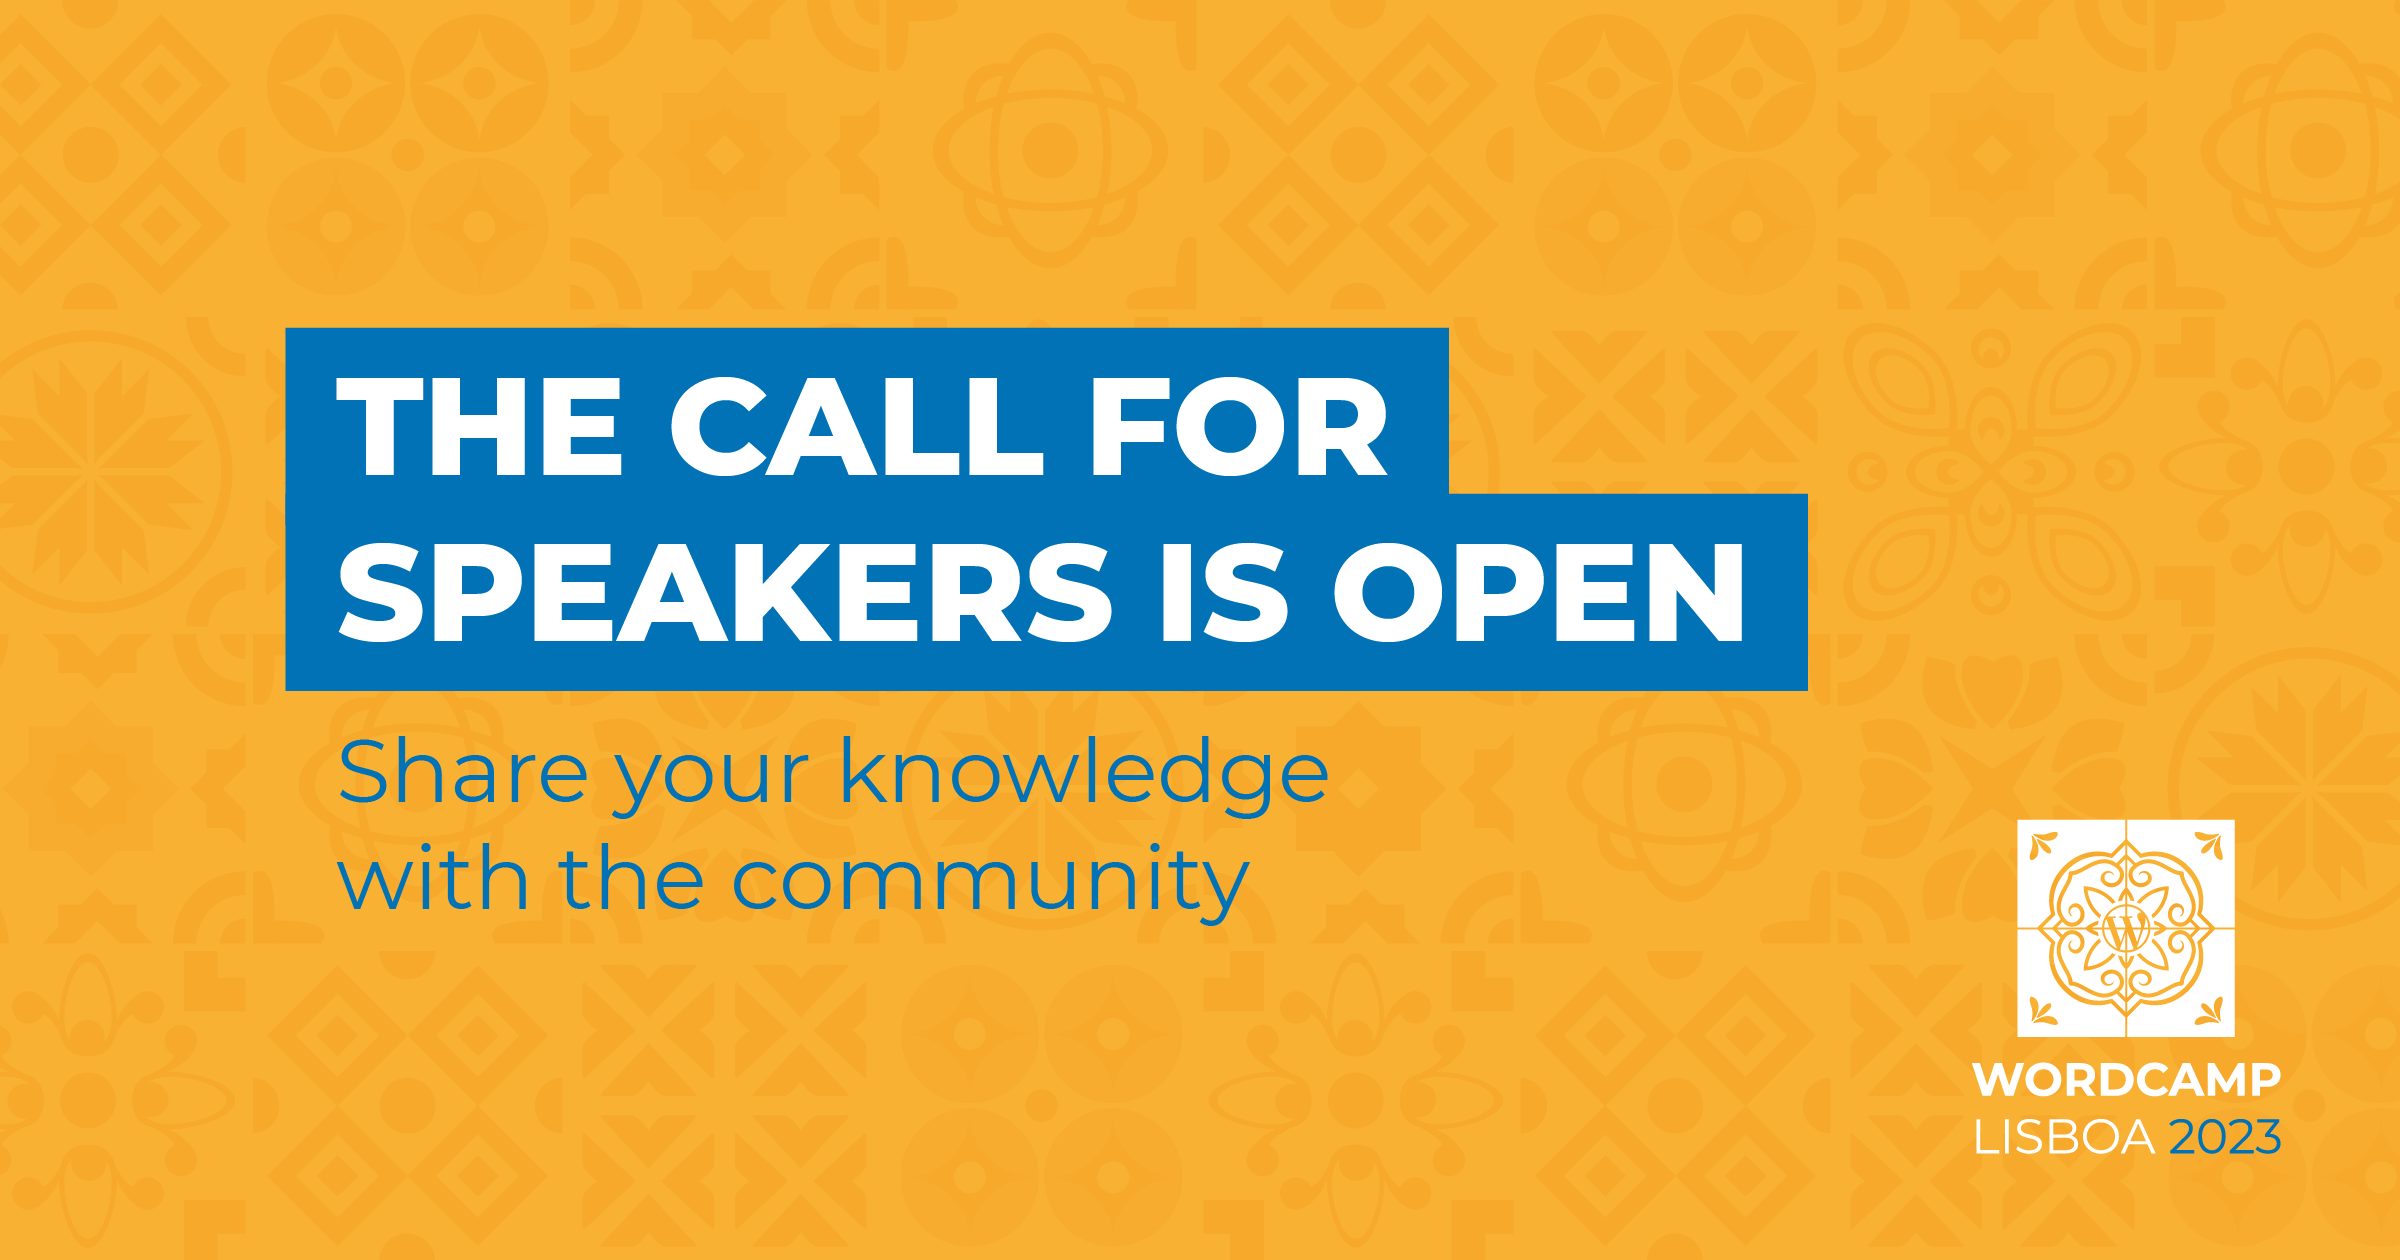 The Call for Speakers is open! Share your knowledge with the community